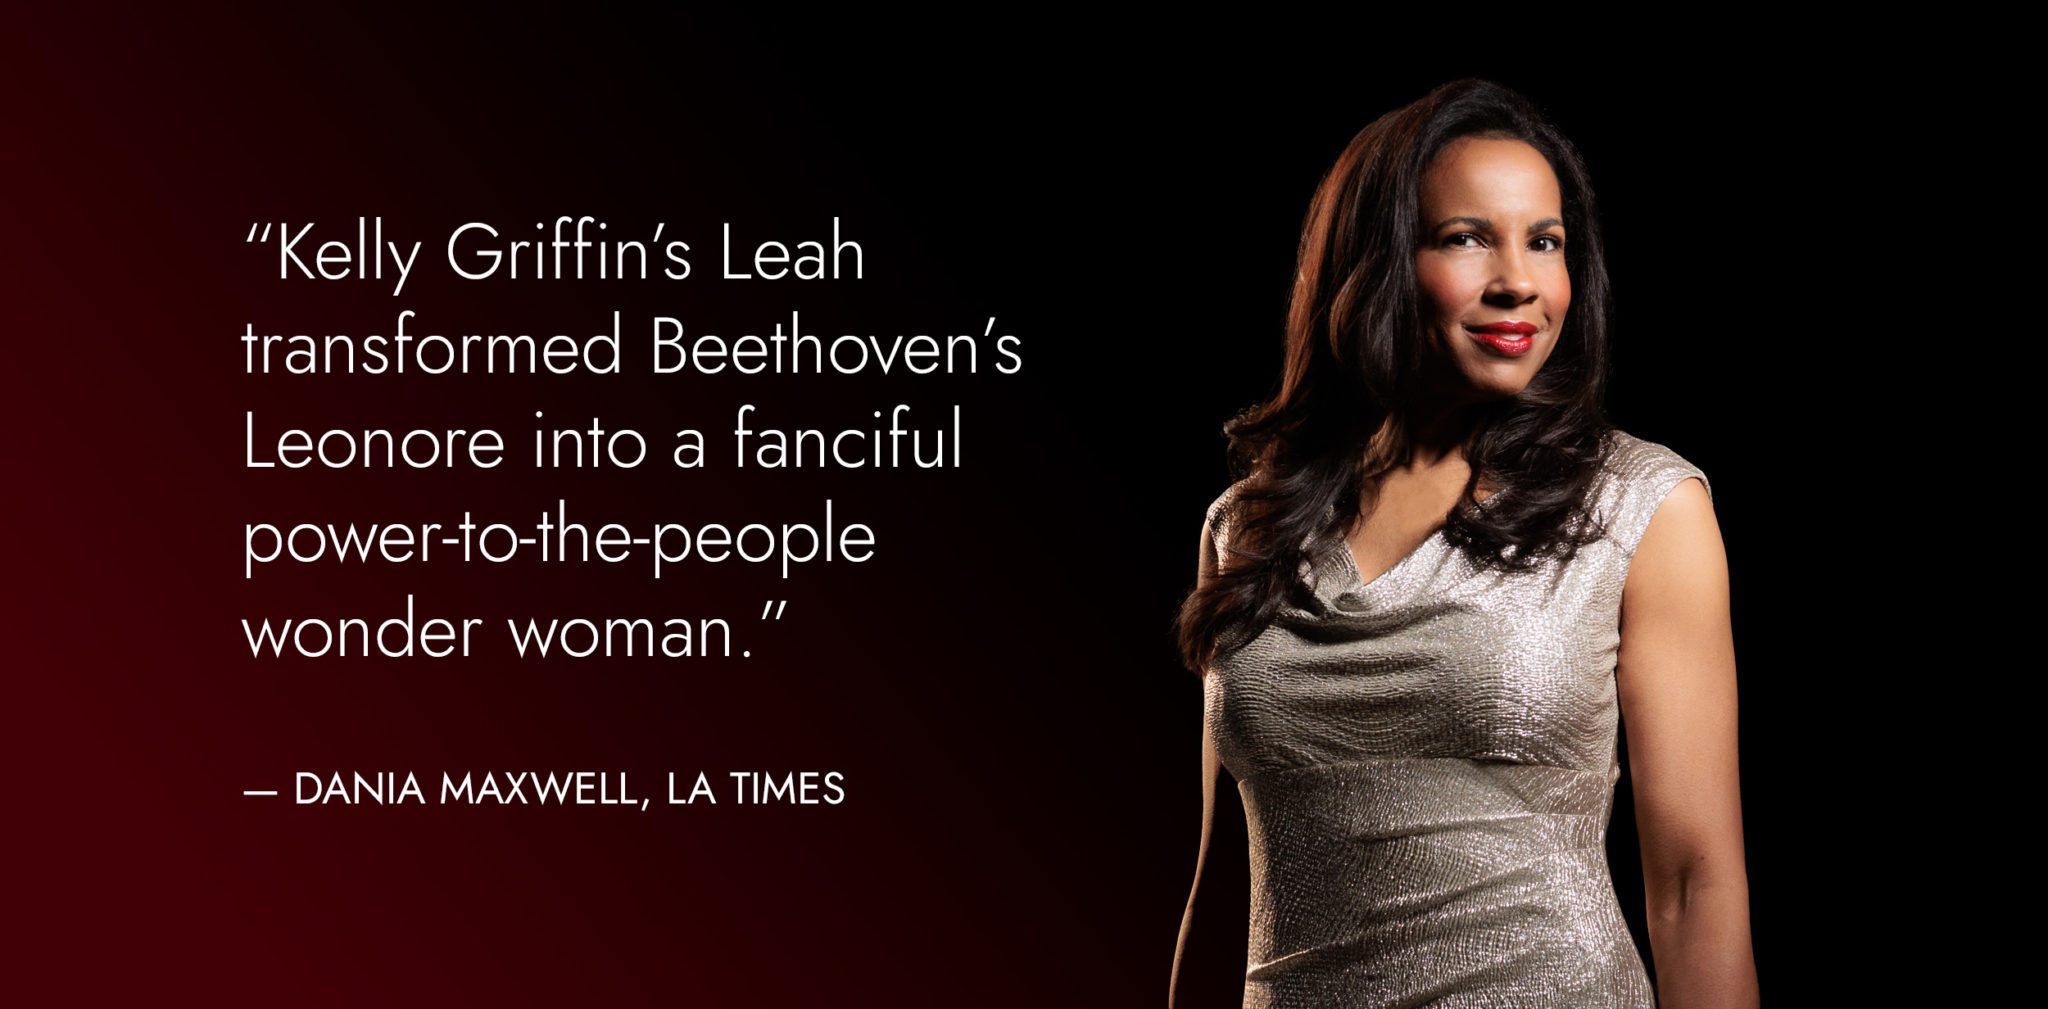 "Kelly Griffin's Leah transformed Beethoven's Leonore into a fanciful power-to-the-people wonder woman." - Dania Maxwell, LA Times